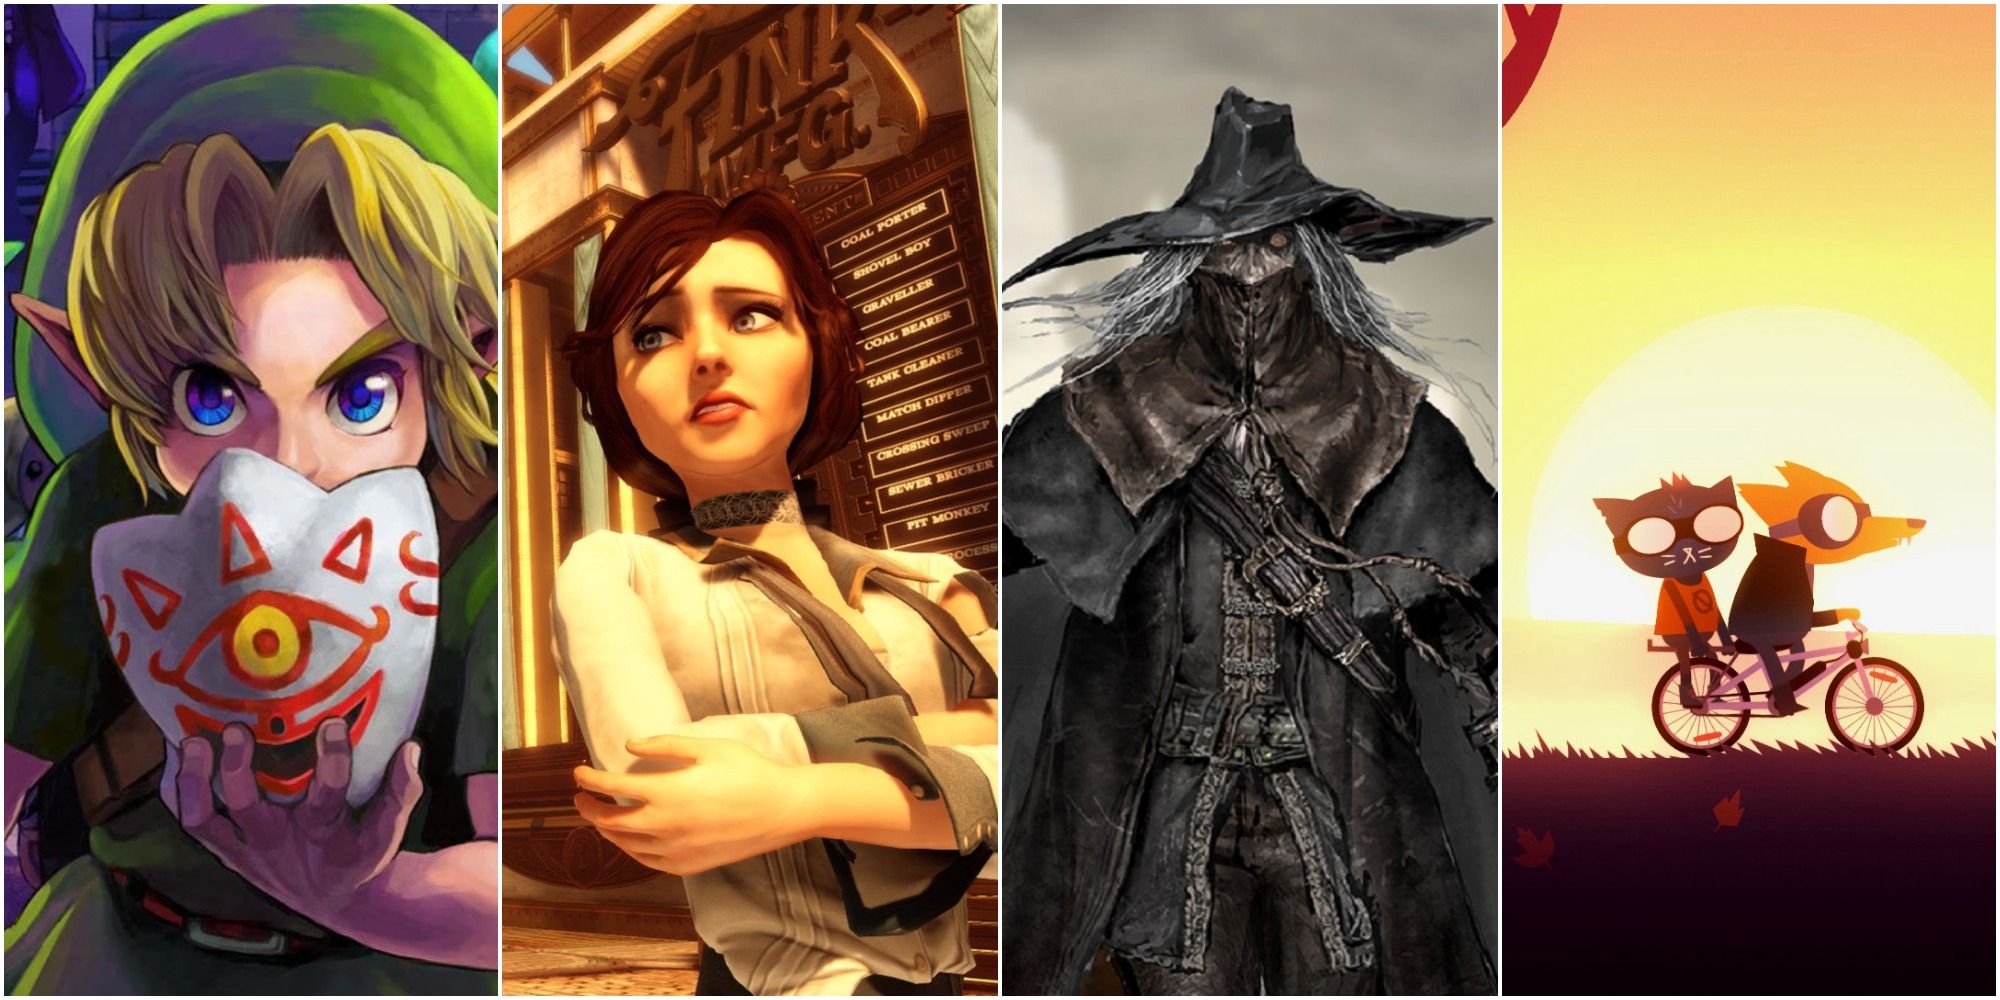 Split image: Link close up holding mysterious object Legend of Zelda: Majora's Mask, close up of uncomfortable female arms folded Bioshock Infinite, close-up of Bloodborne Hunter, and character cycling with another character on the back of their bicycle Night In The Woods